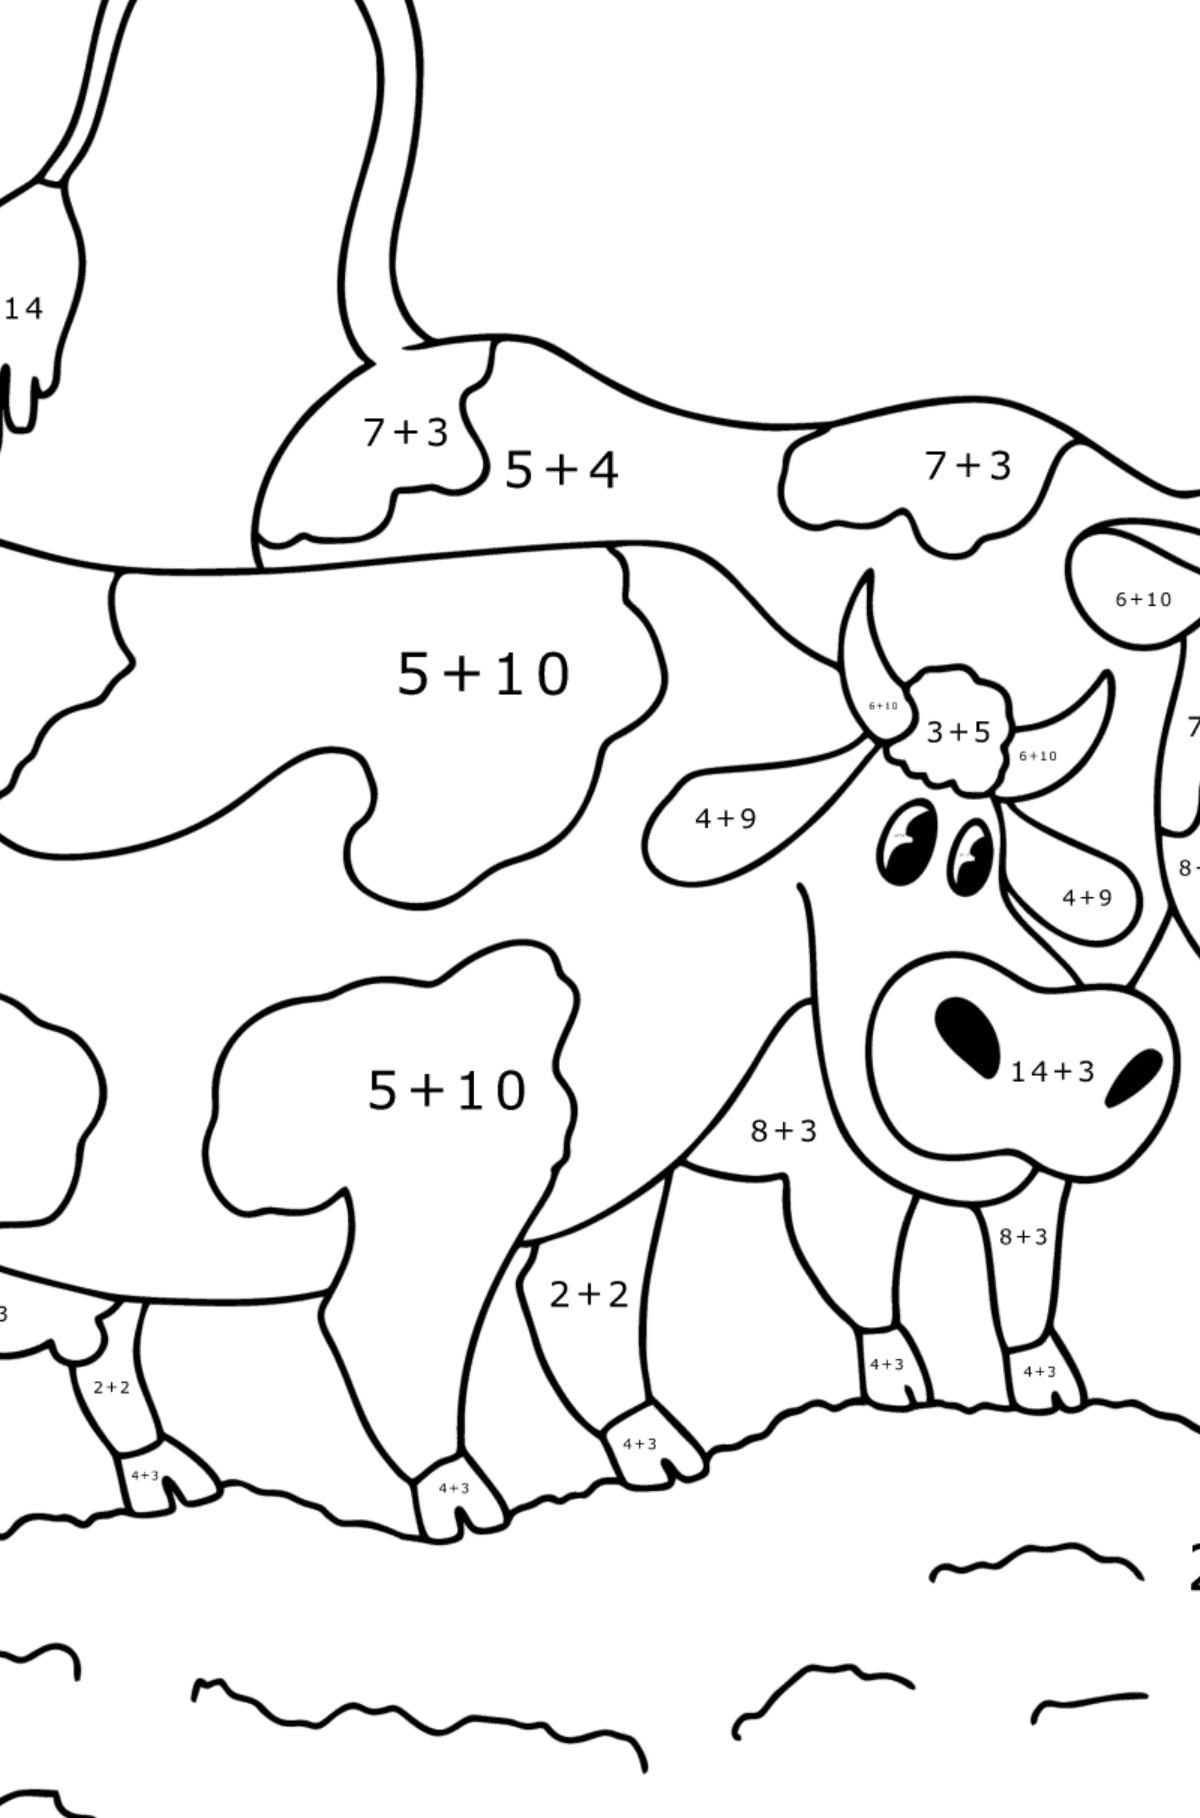 Two cows in the meadow Coloring page - Math Coloring - Addition for Kids